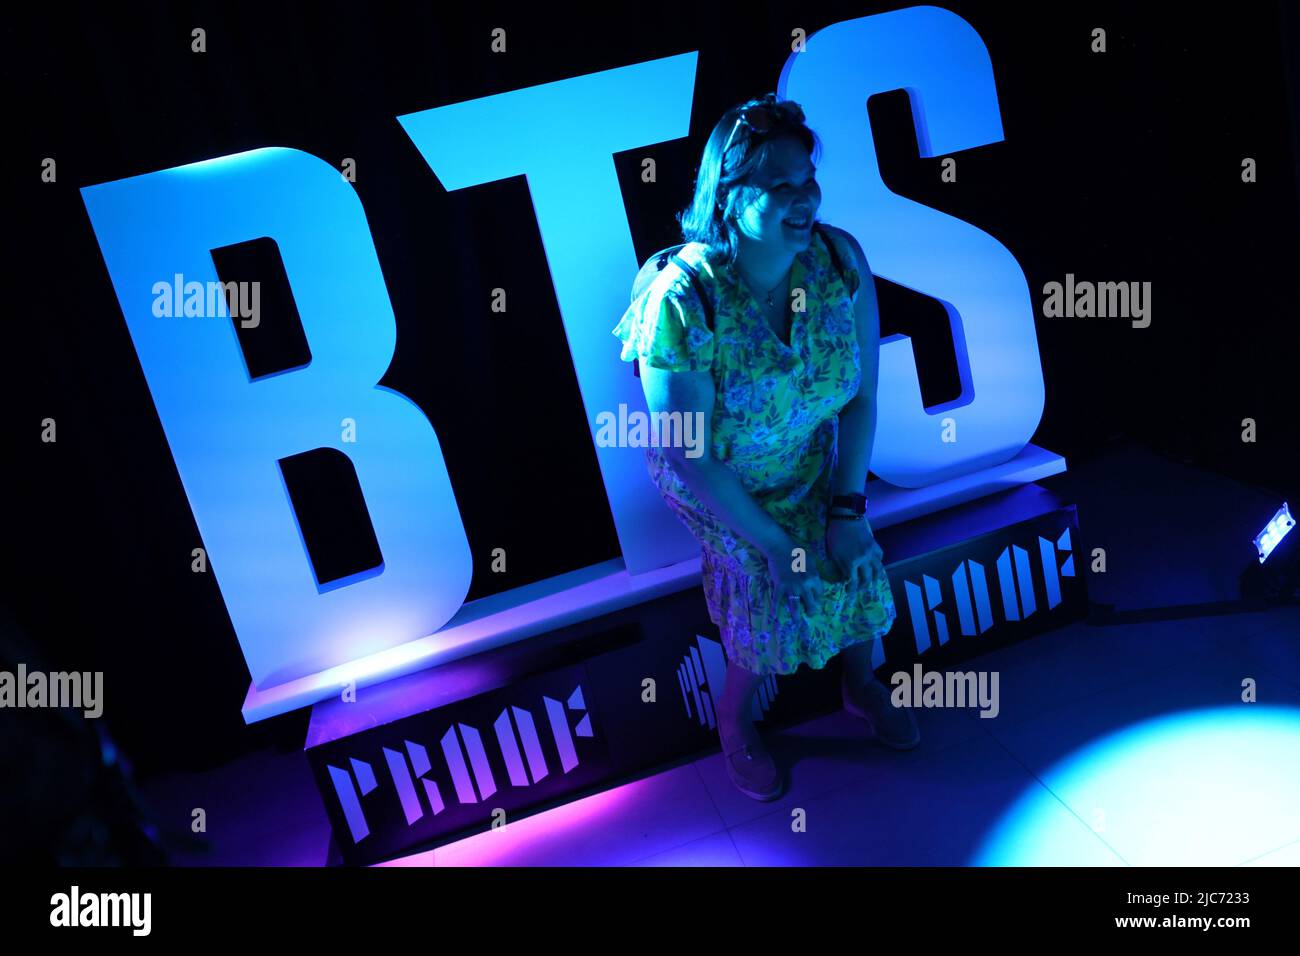 A fan of the South Korean boy band BTS poses for a picture inside a newly opened pop-up shop selling BTS merchandise after the release of their new album 'Proof' in in Manhattan in New York City, New York, U.S., June 10, 2022. REUTERS/Mike Segar Stock Photo